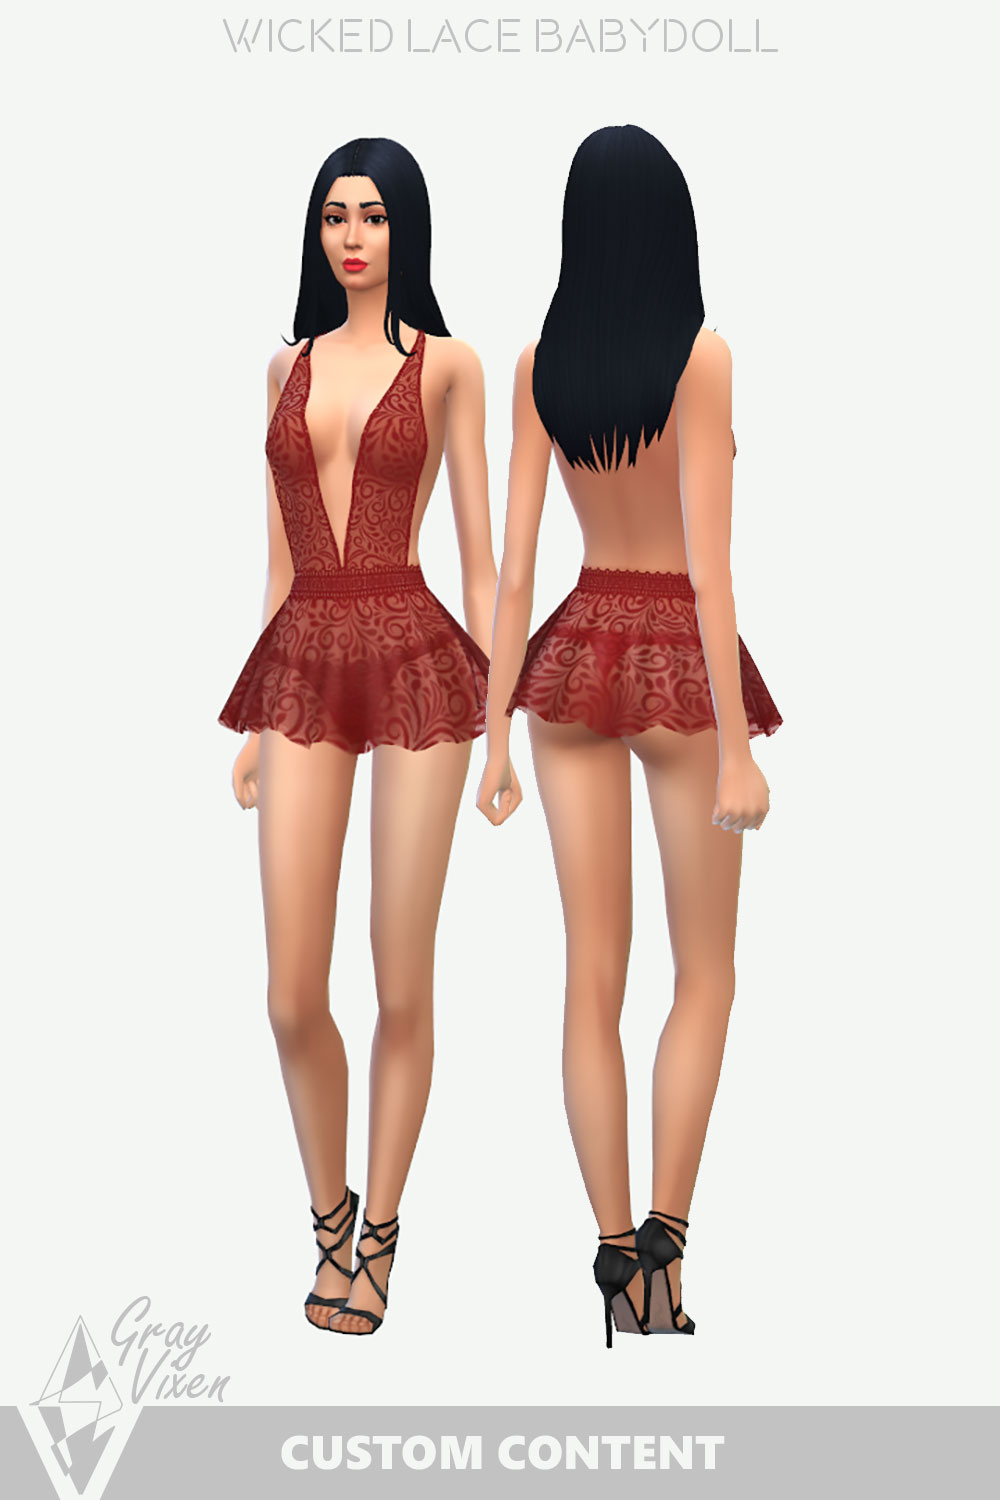 The Sims 4 Sexy Lingerie Lace Babydoll